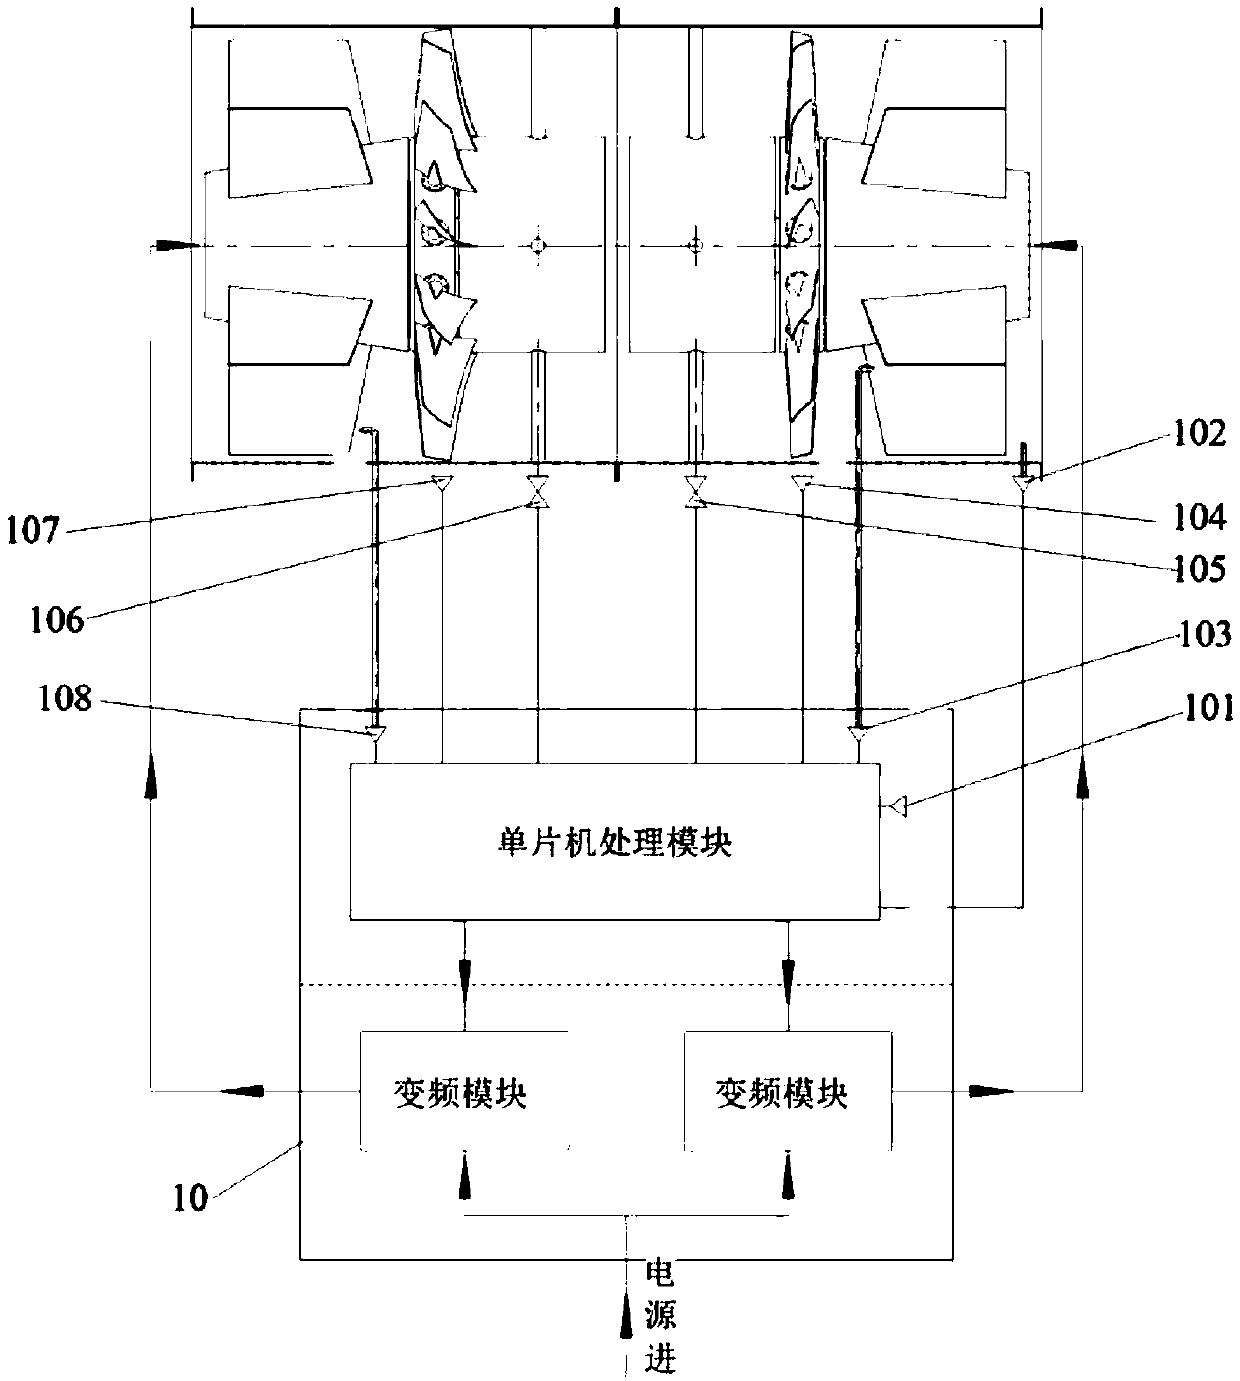 A control method for an axial flow fan with counter-rotating movable blades